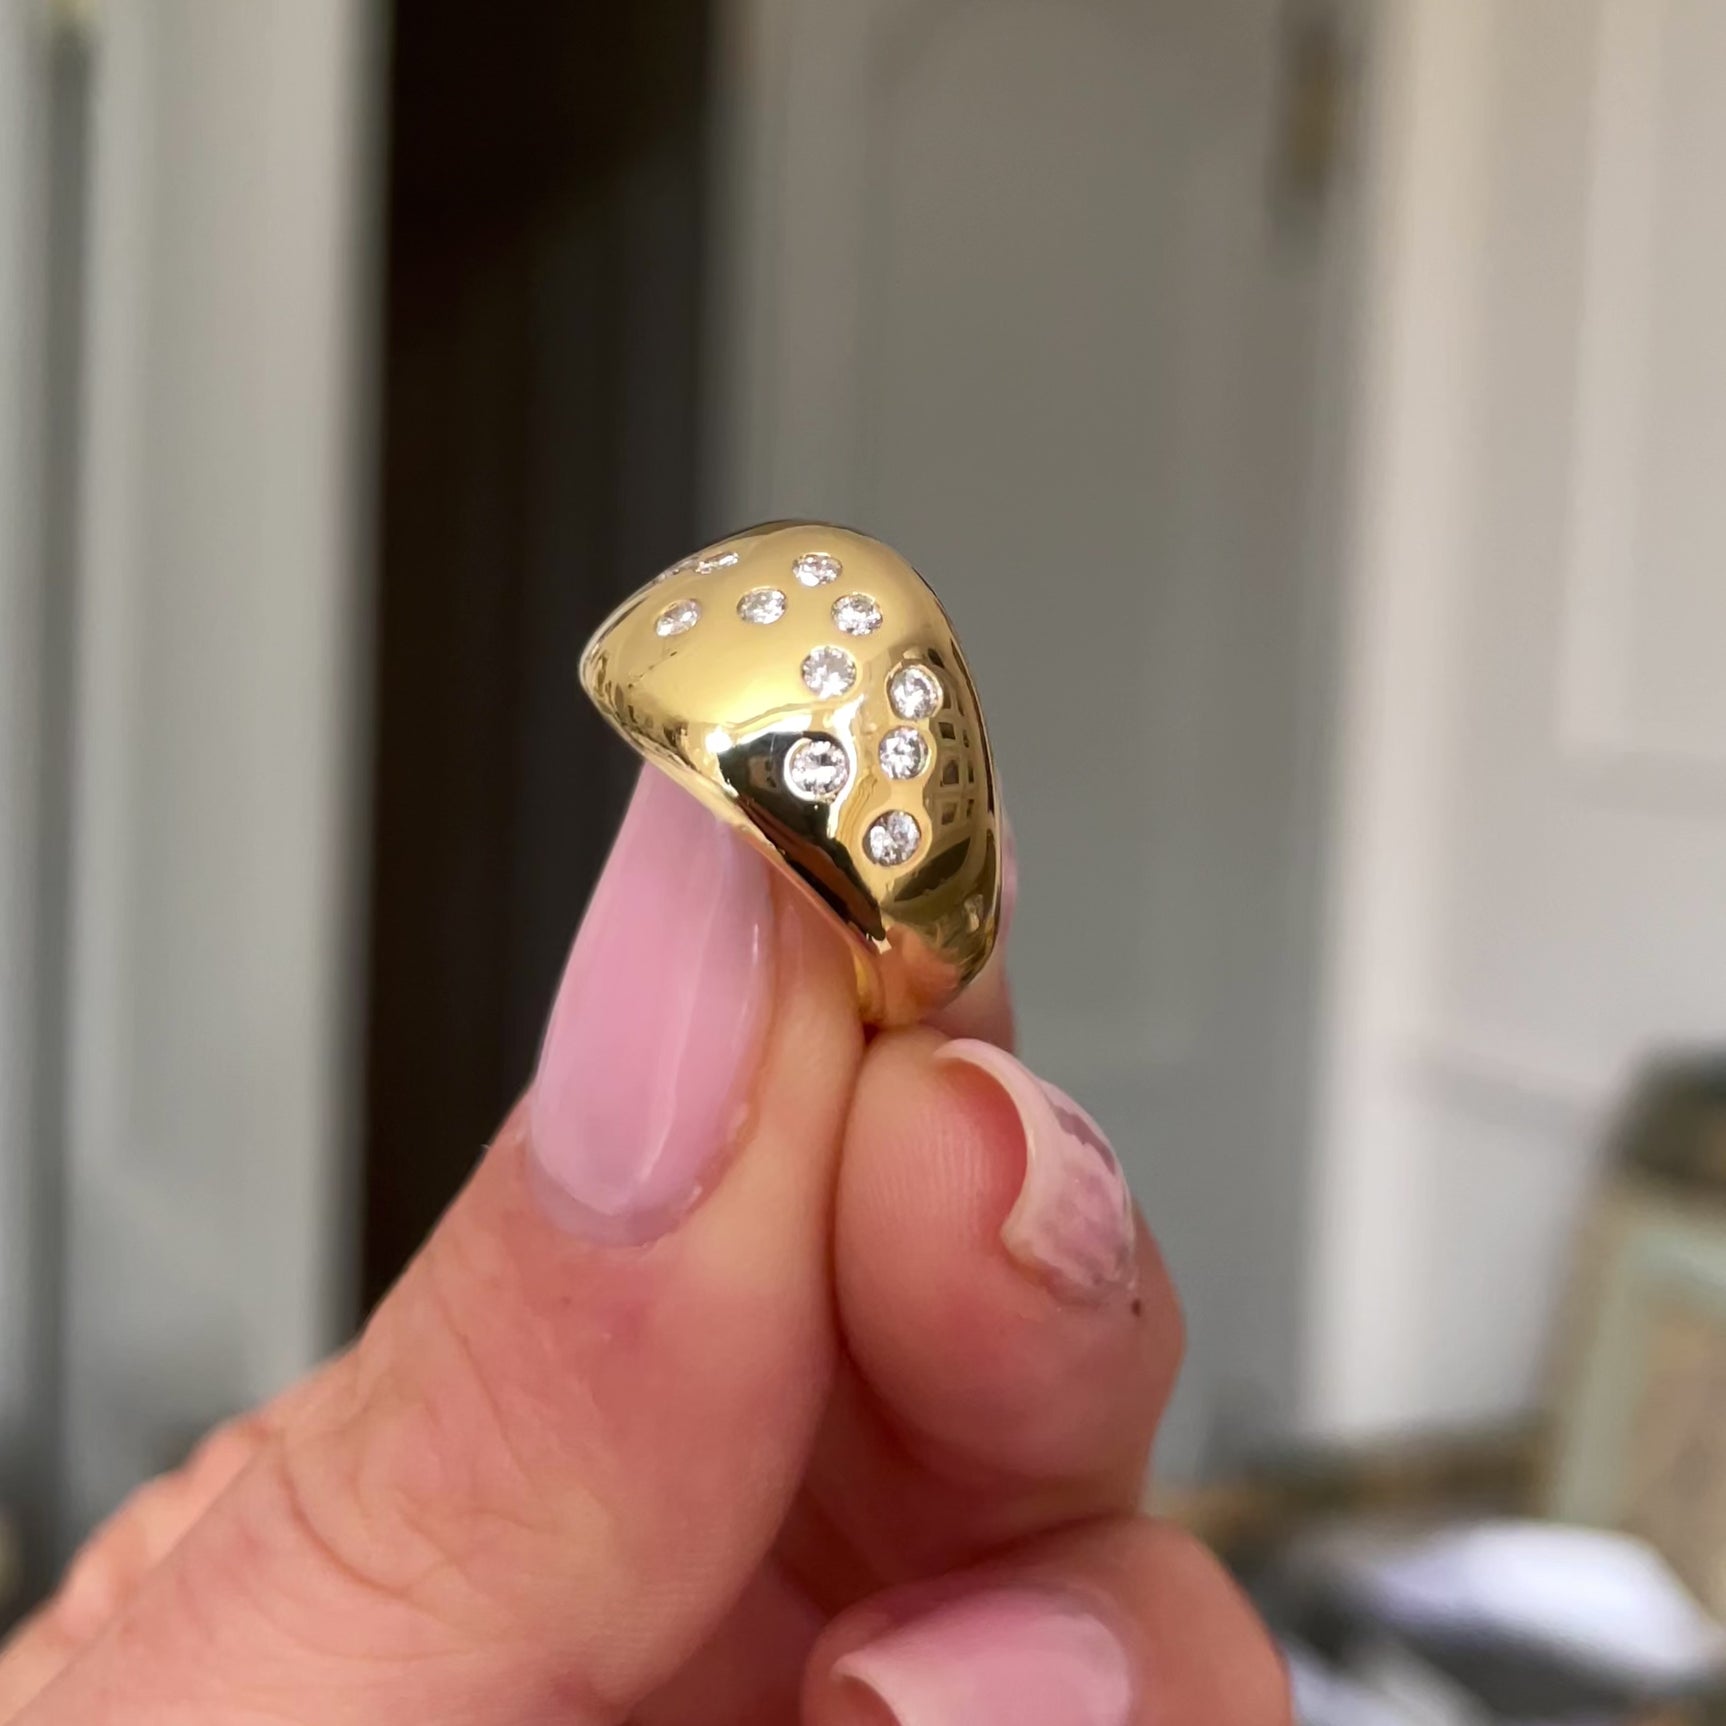 Vintage French diamond constellation ring, held in fingers and rotated to give perspective.